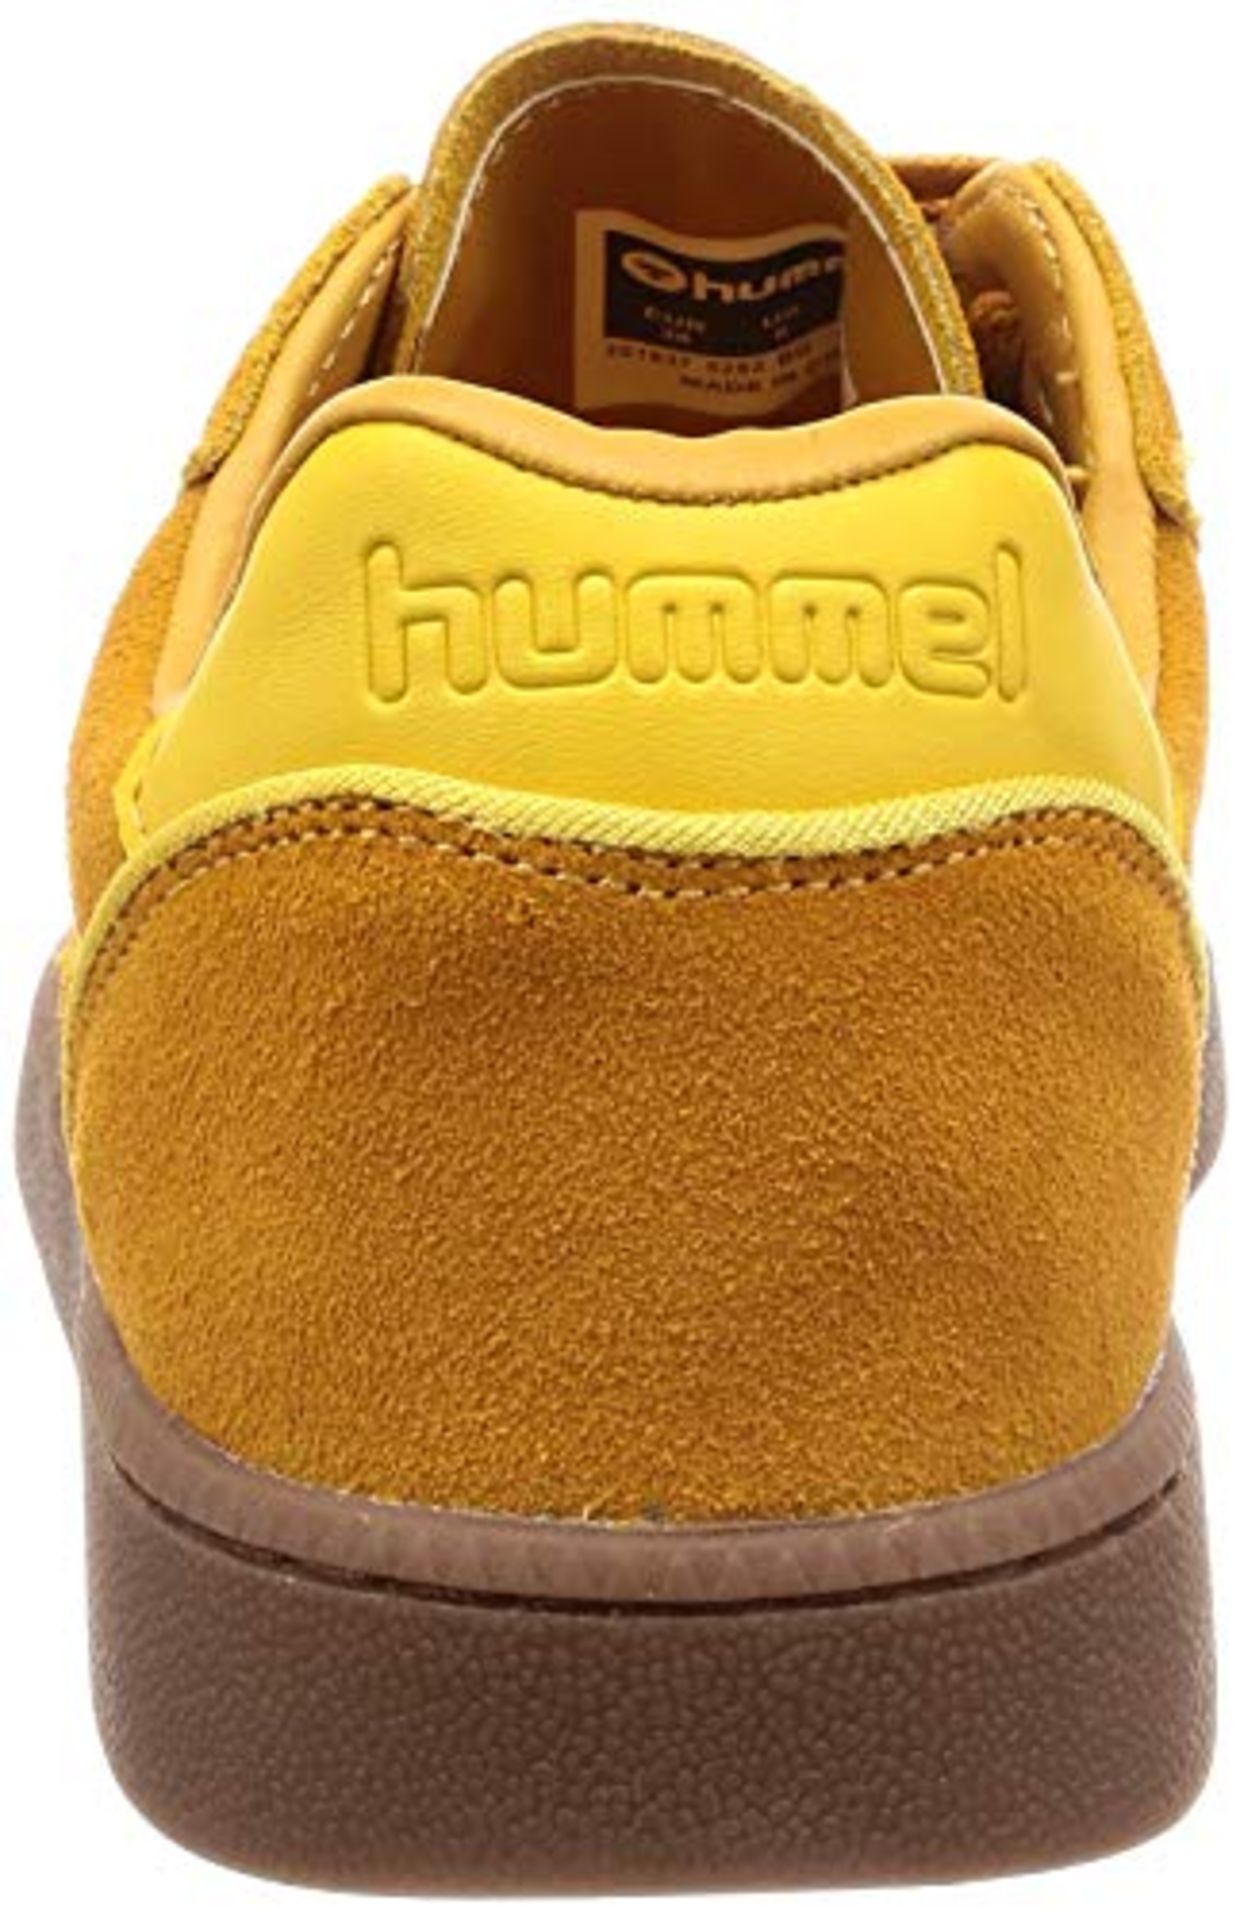 1 x Hummel Chaussures HB team HM201937 | EAN: 5700494865790 - Image 2 of 7